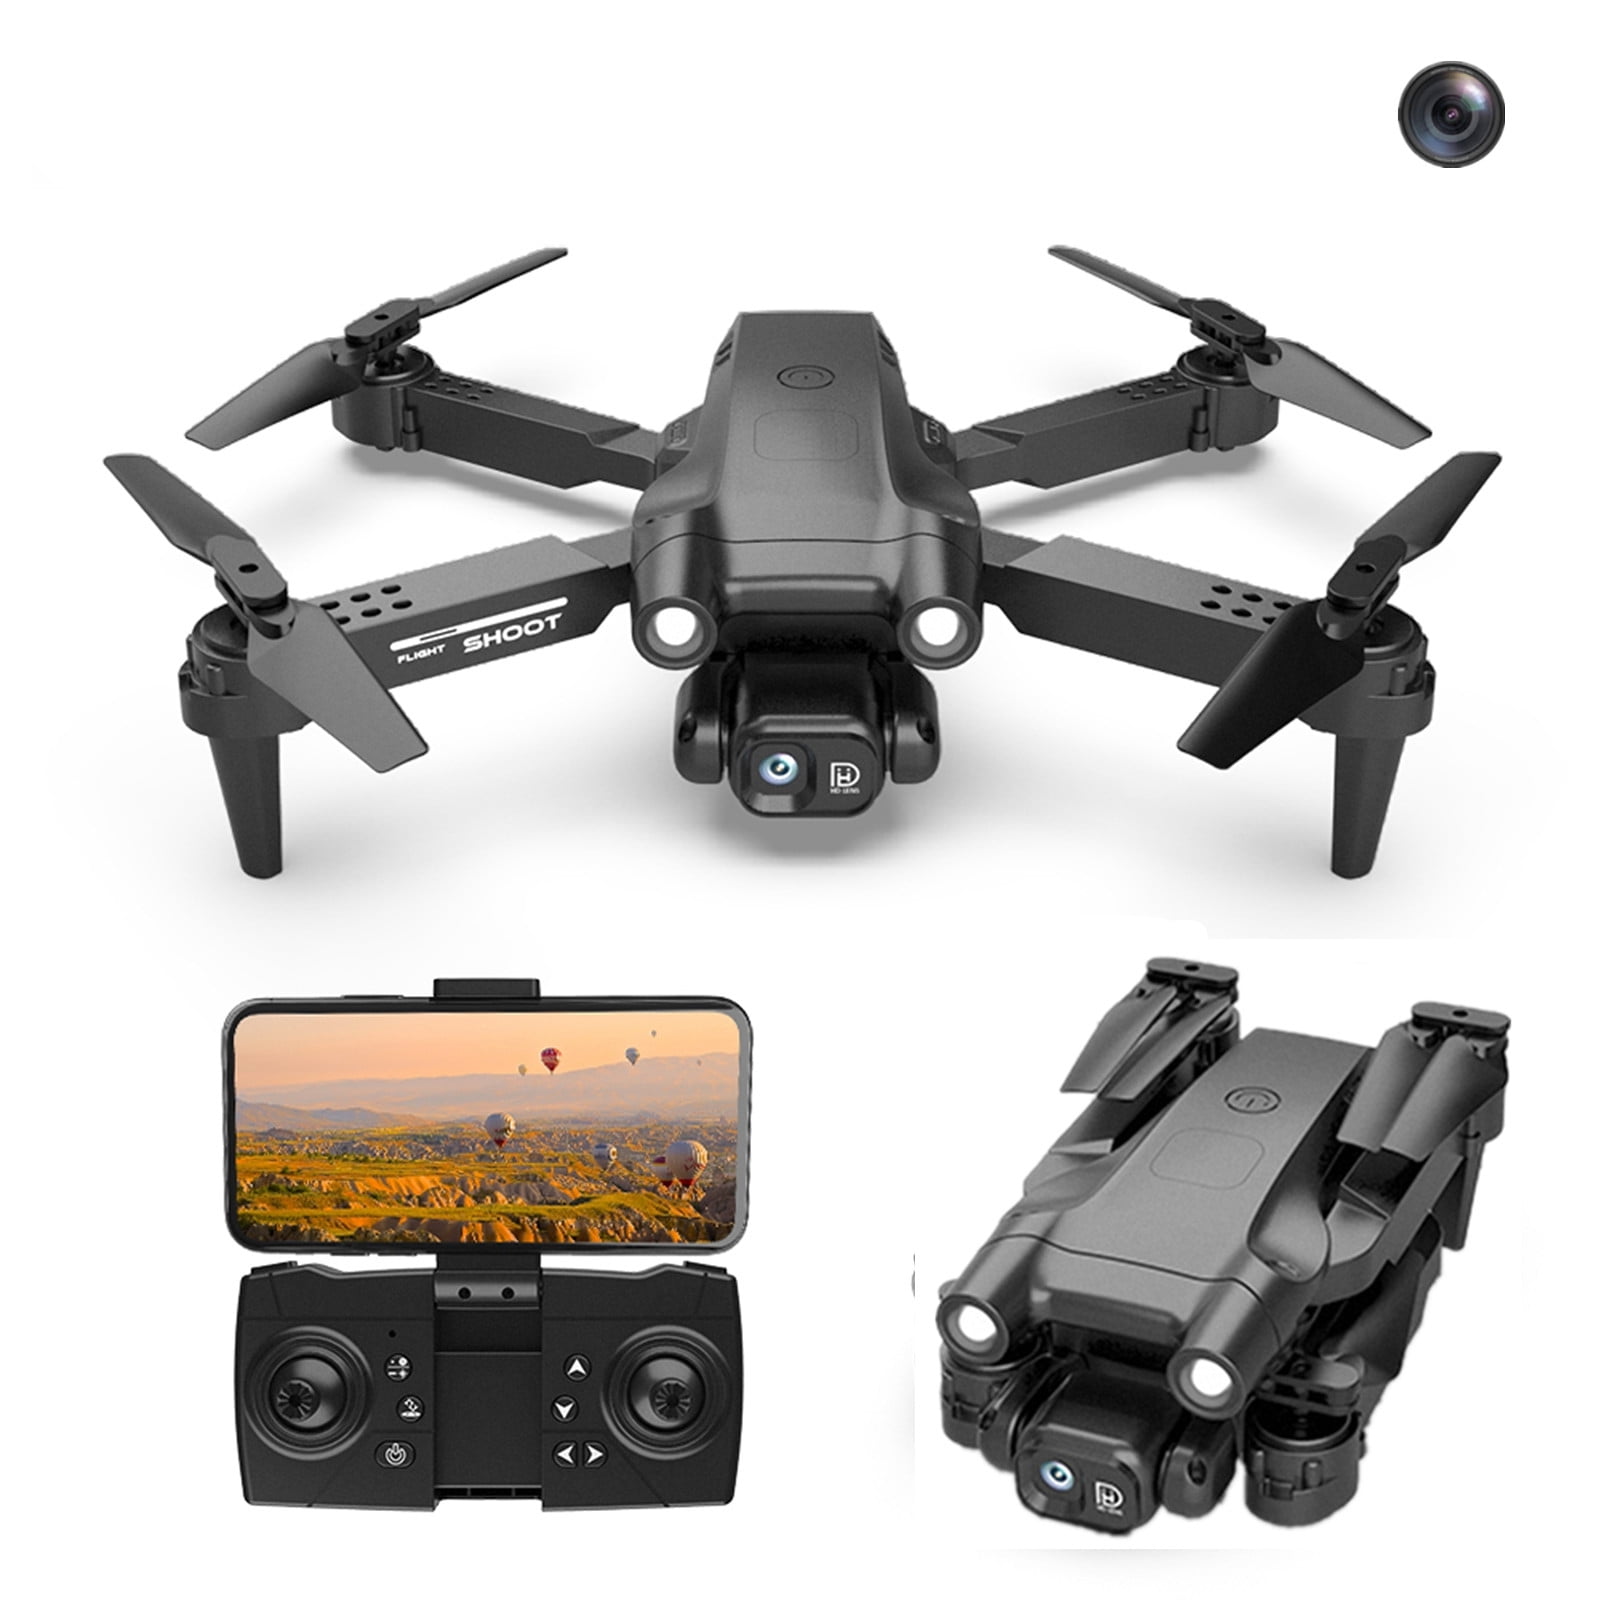 Artsic FPV RC Drone with Camera for Kids Adults Beginners,720P HD Wifi Live  Video Camera Drone, Toys Gifts for Boys Girls with Altitude Hold,  High-Speed Rotation,3D Flips, Altitude Hold, Headless Mode 